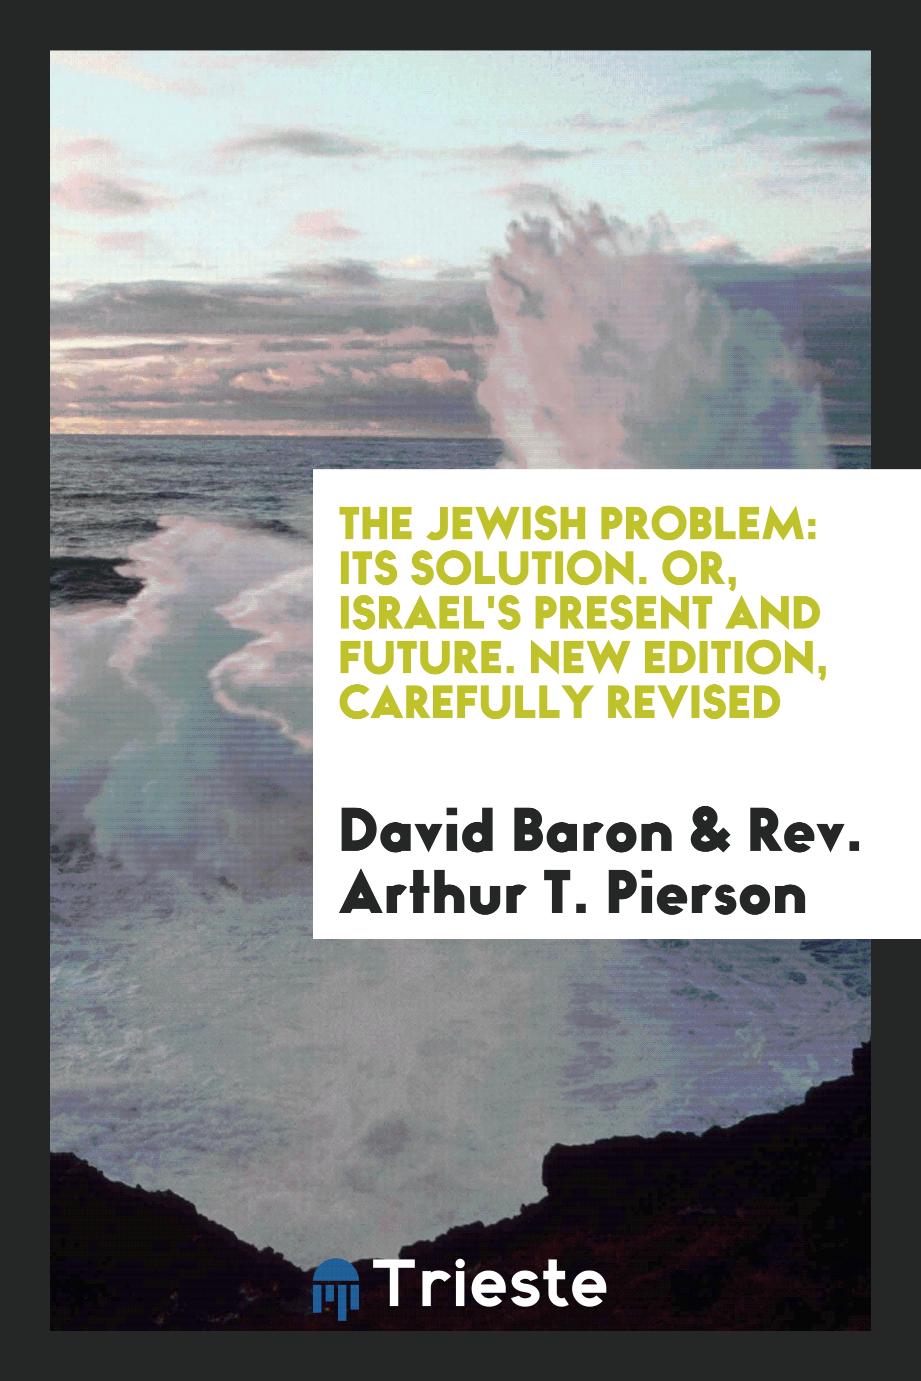 The Jewish Problem: Its Solution. Or, Israel's Present and Future. New Edition, Carefully Revised